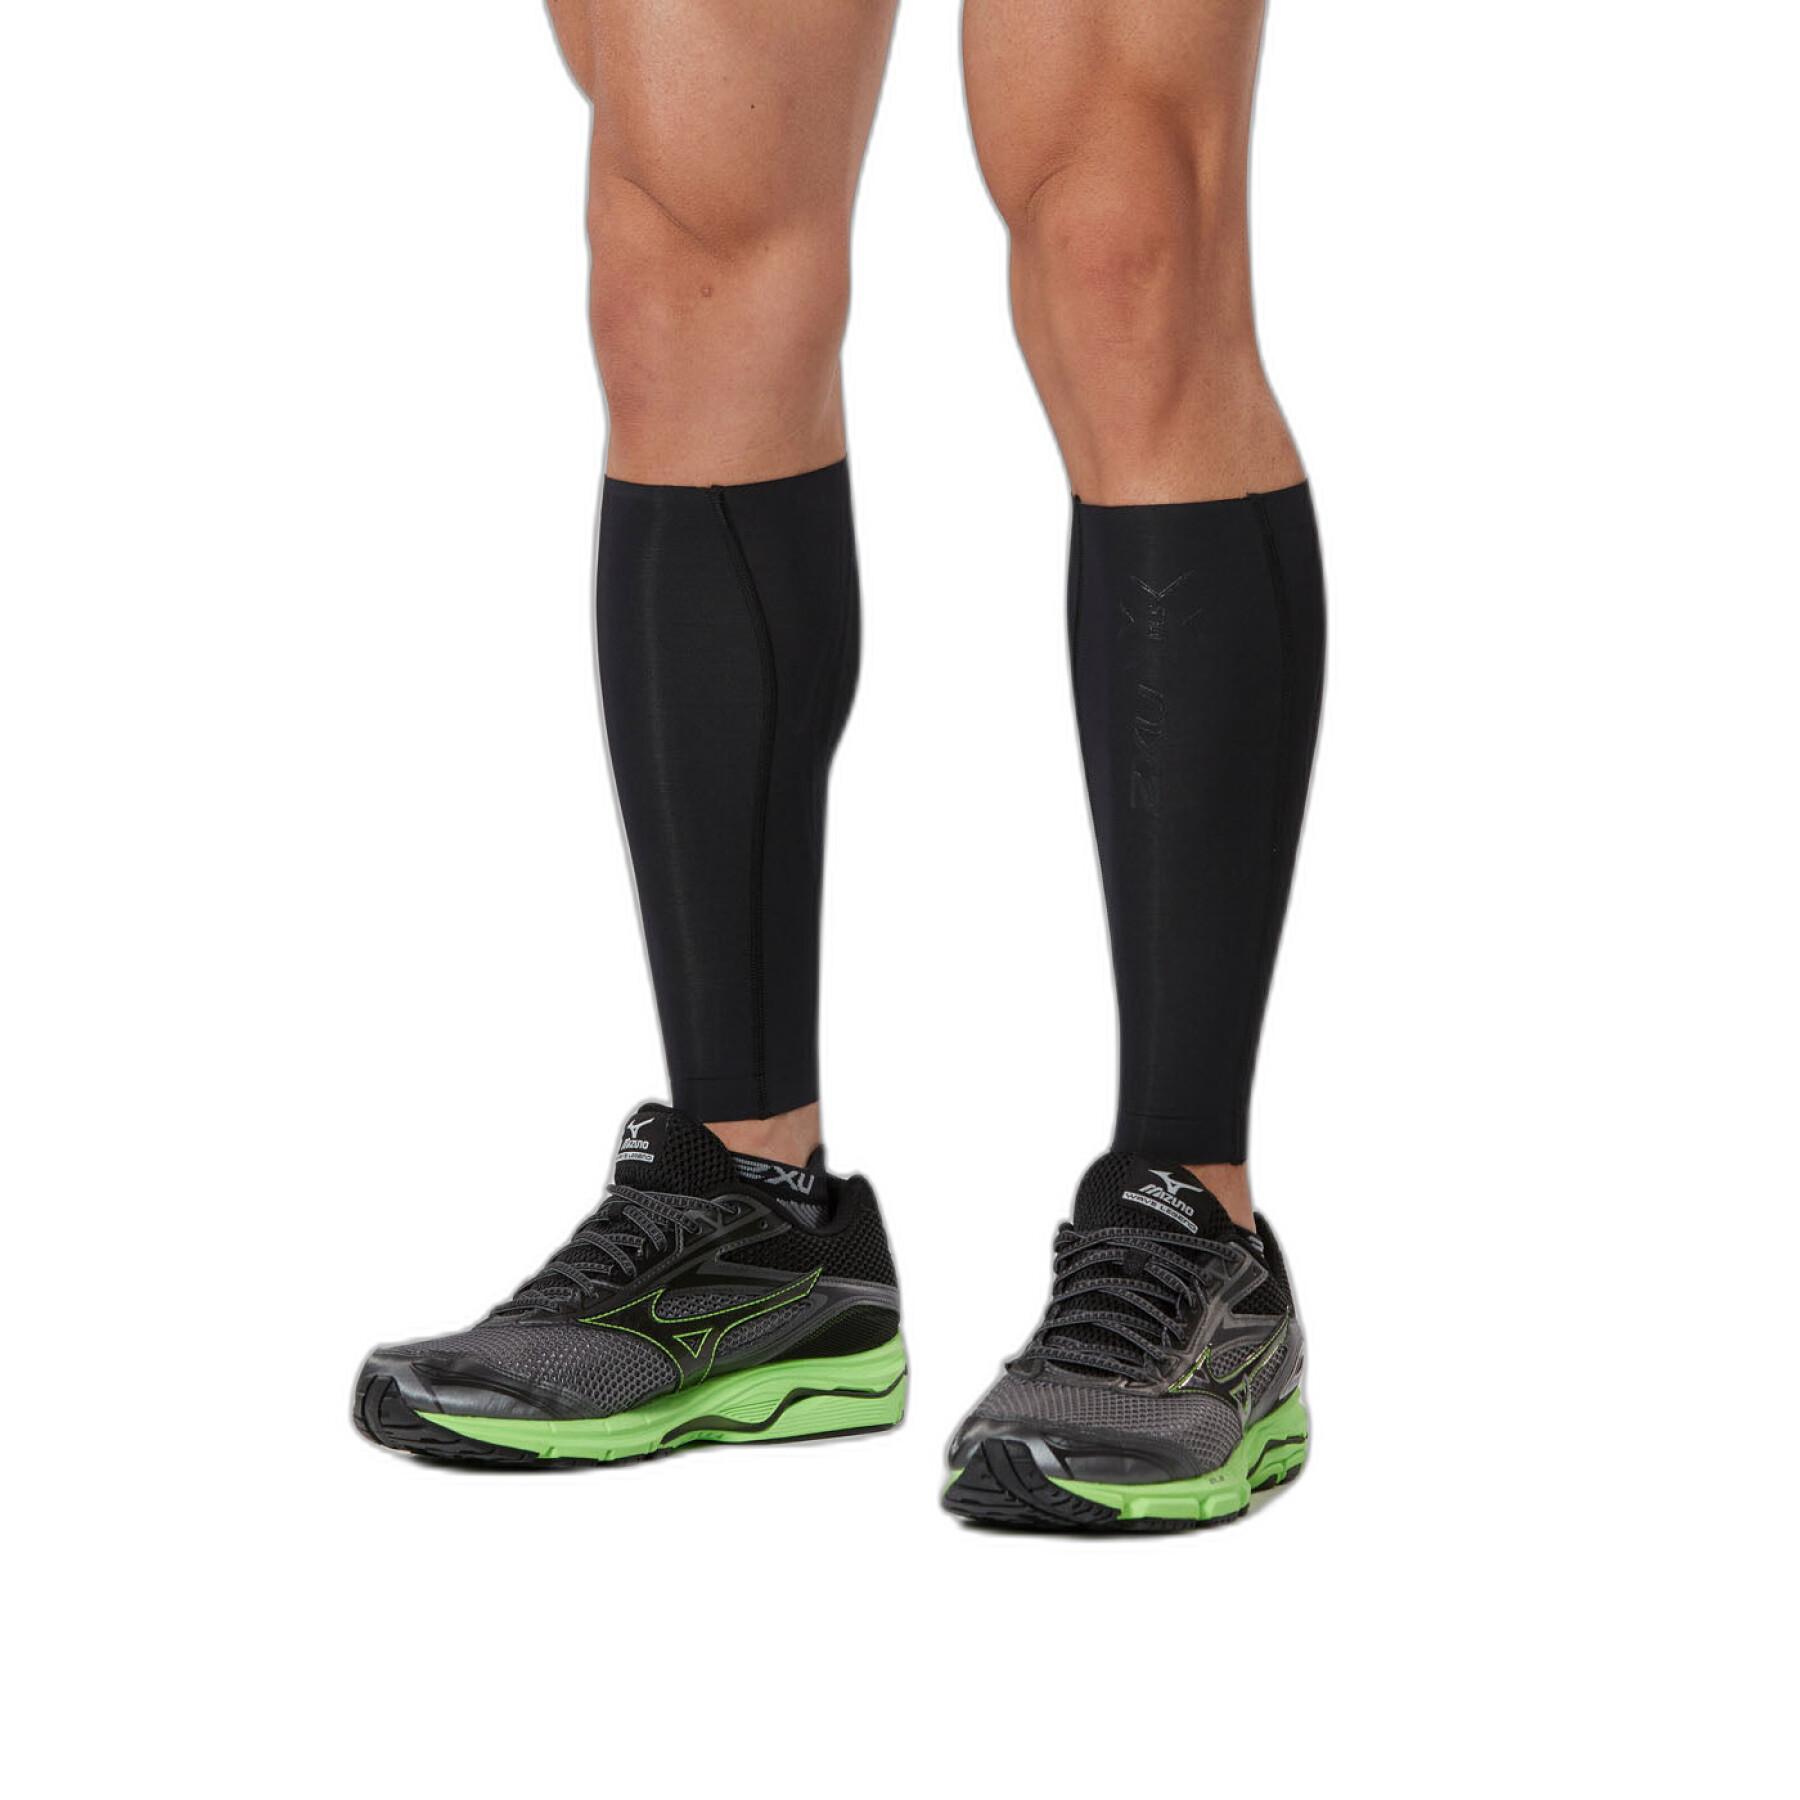 Calf protection compression sleeve 2XU Light Speed